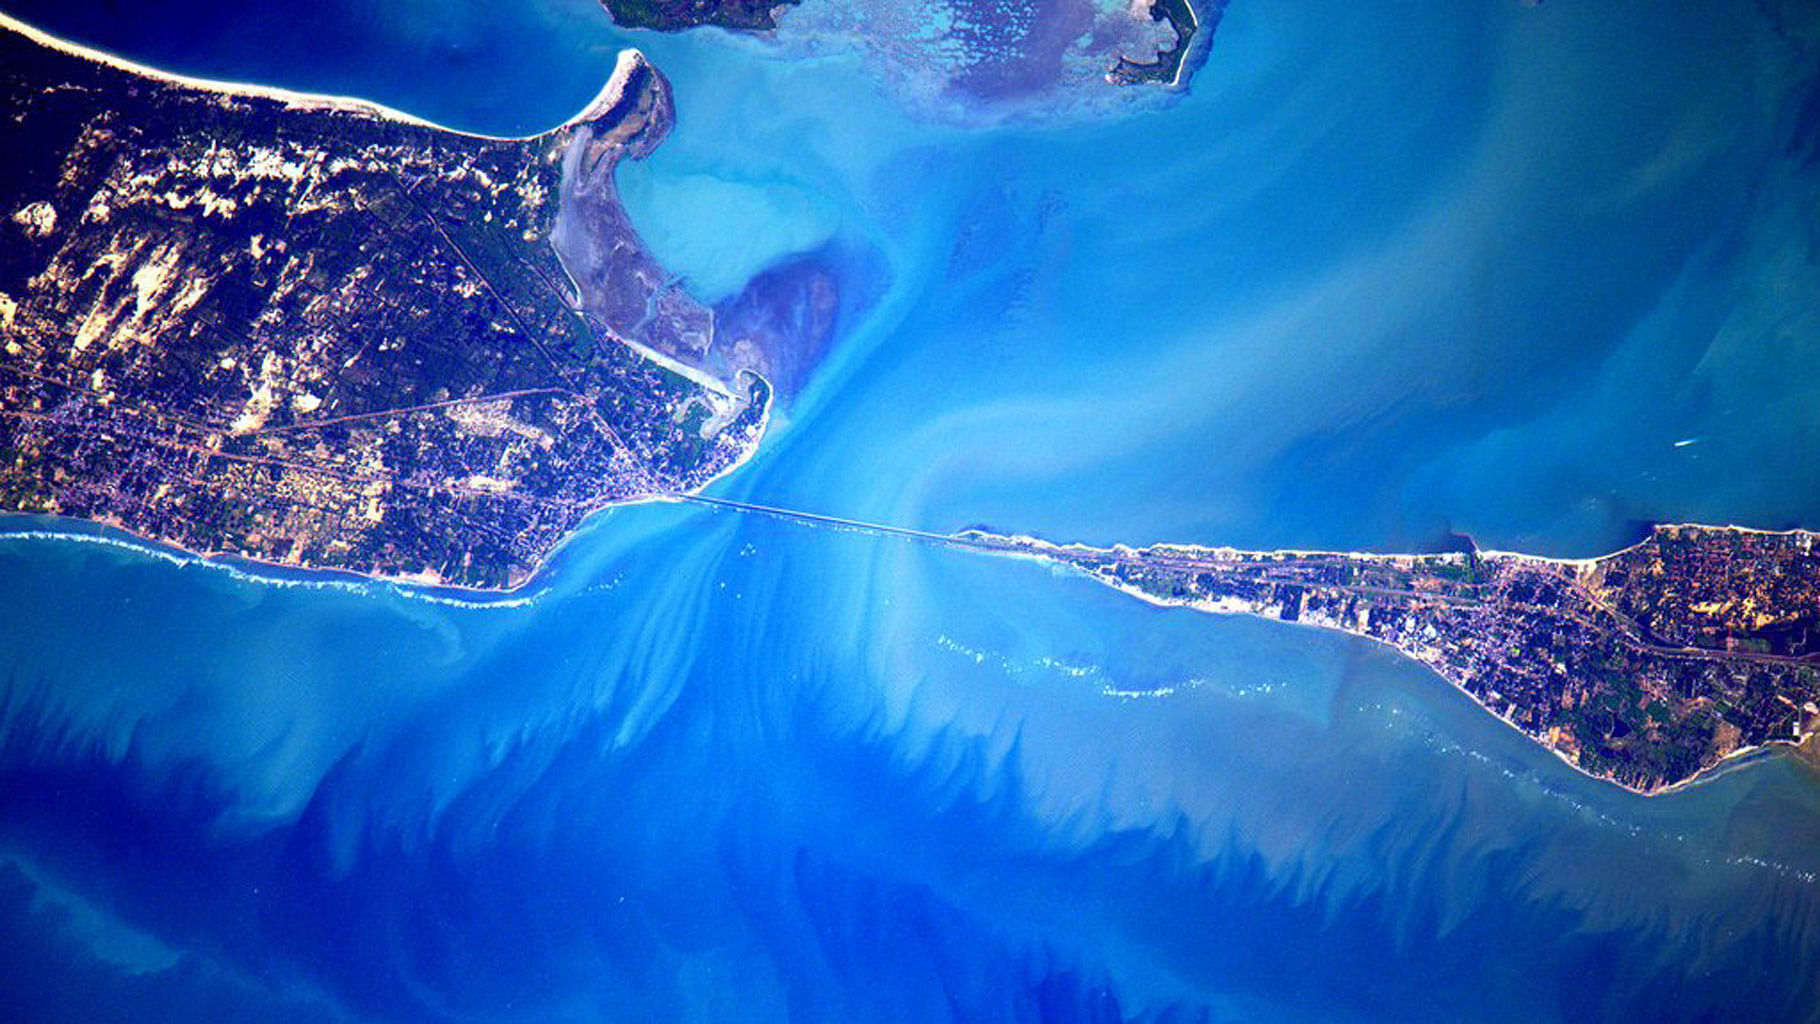 NASA Astronaut Scott Kelly shared this picture of India’s southern tip on Twitter. (Photo: Twitter/<a href="https://twitter.com/StationCDRKelly">Scott Kelly</a>)